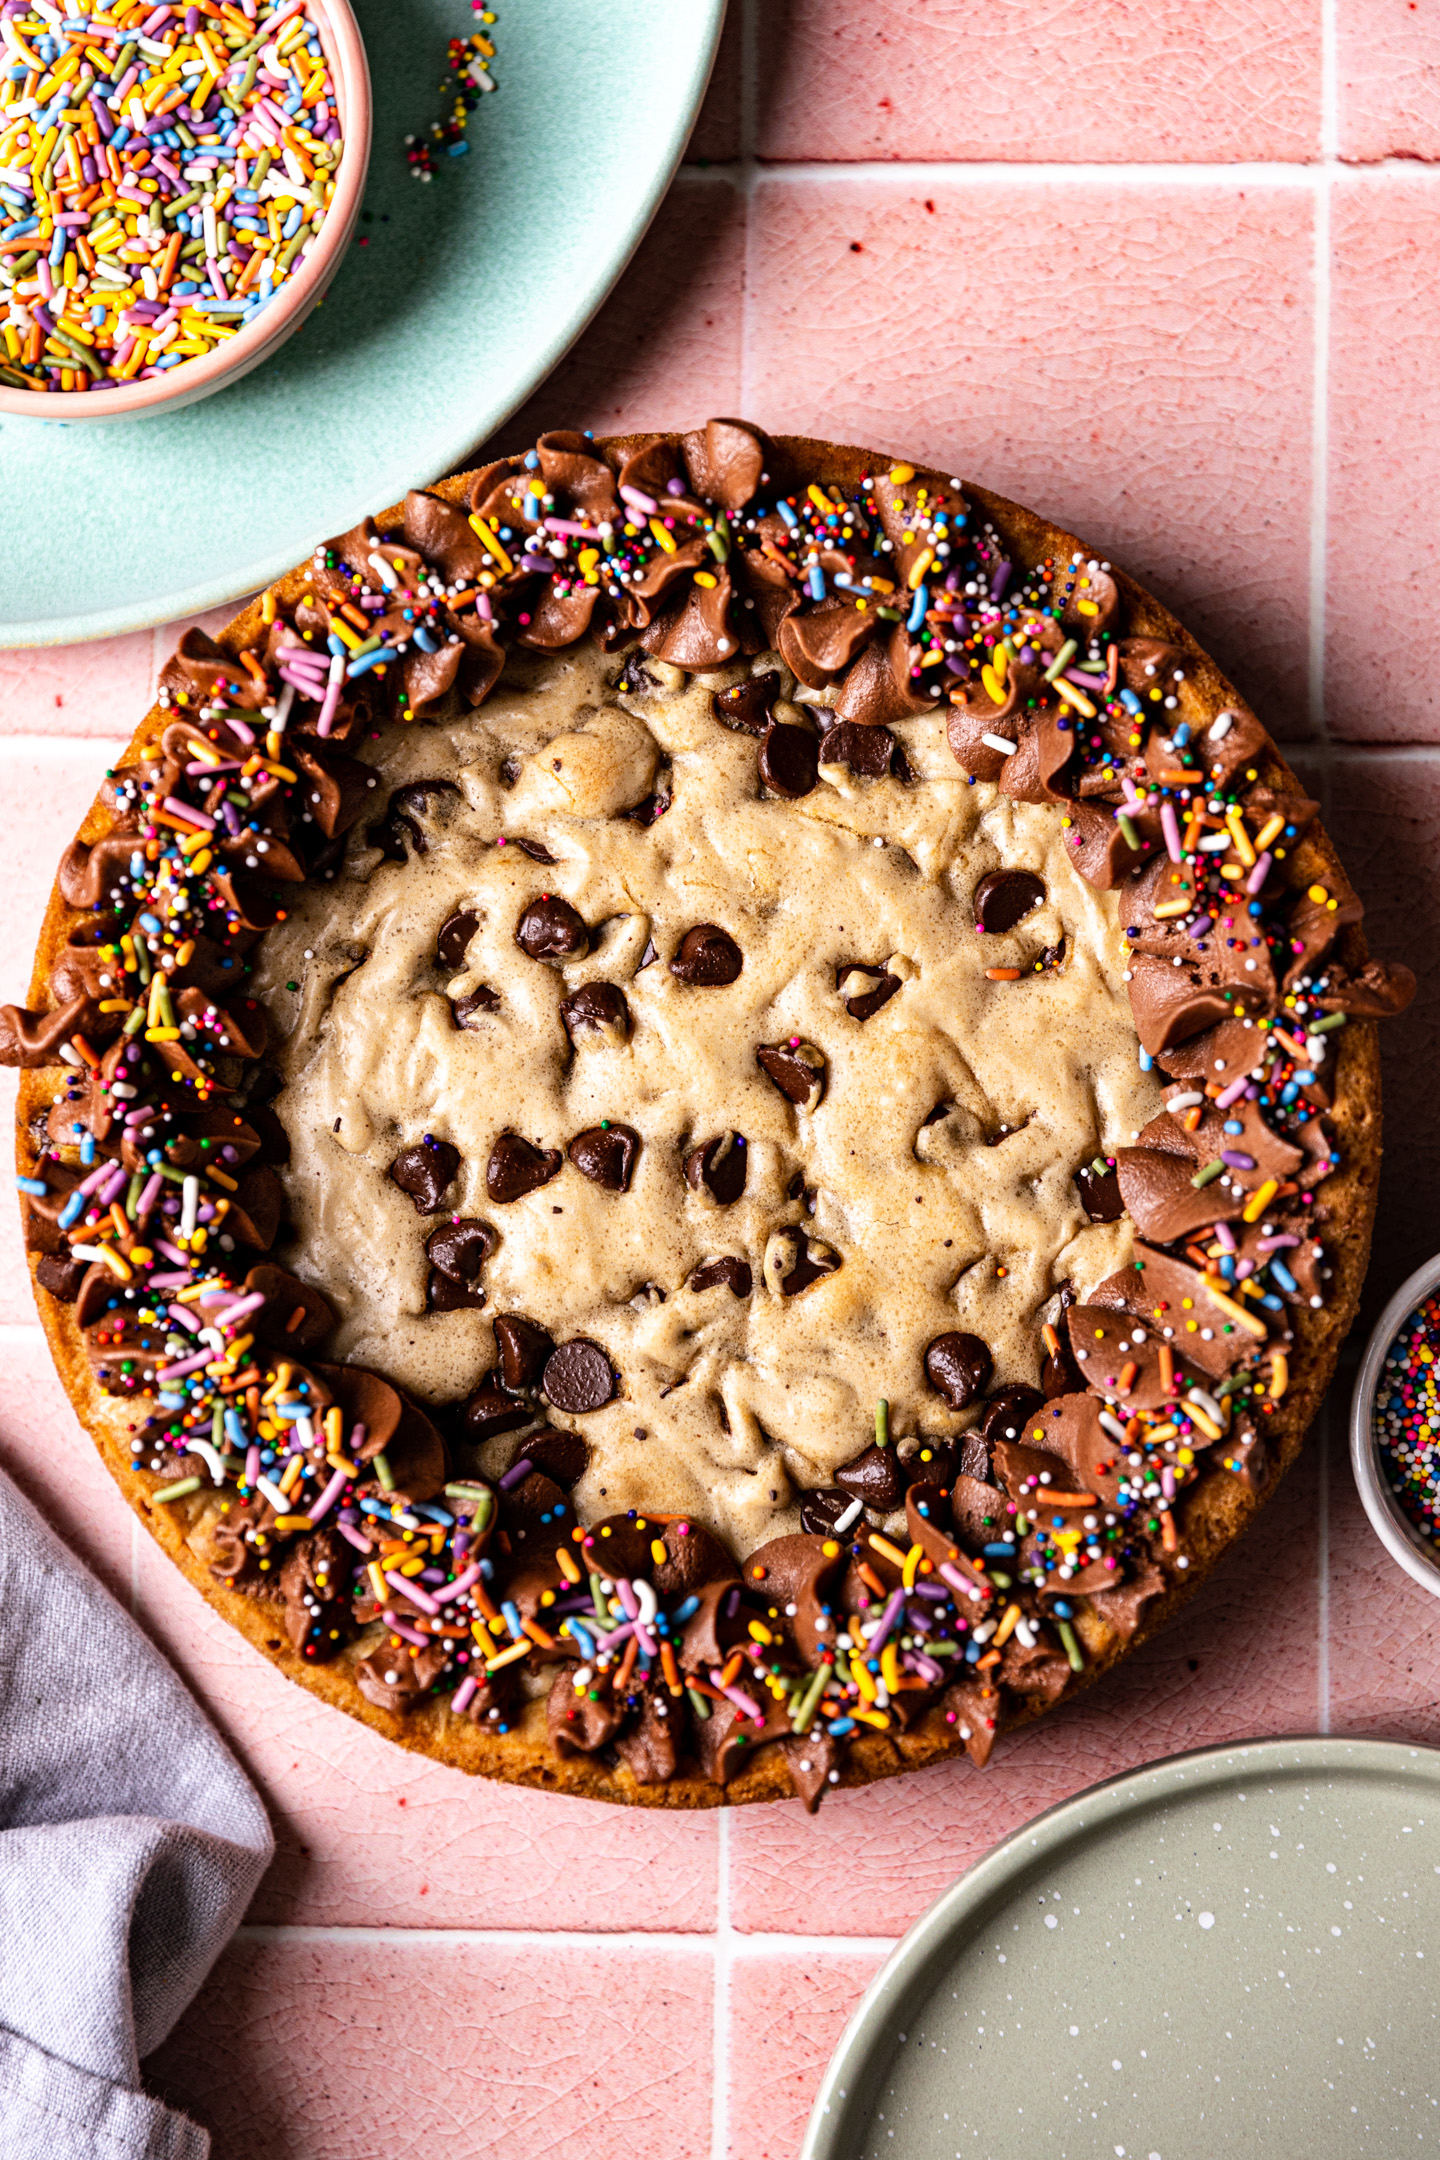 A chocolate chip cookie cake decorated with chocolate frosting and rainbow sprinkles on a pink tile surface.